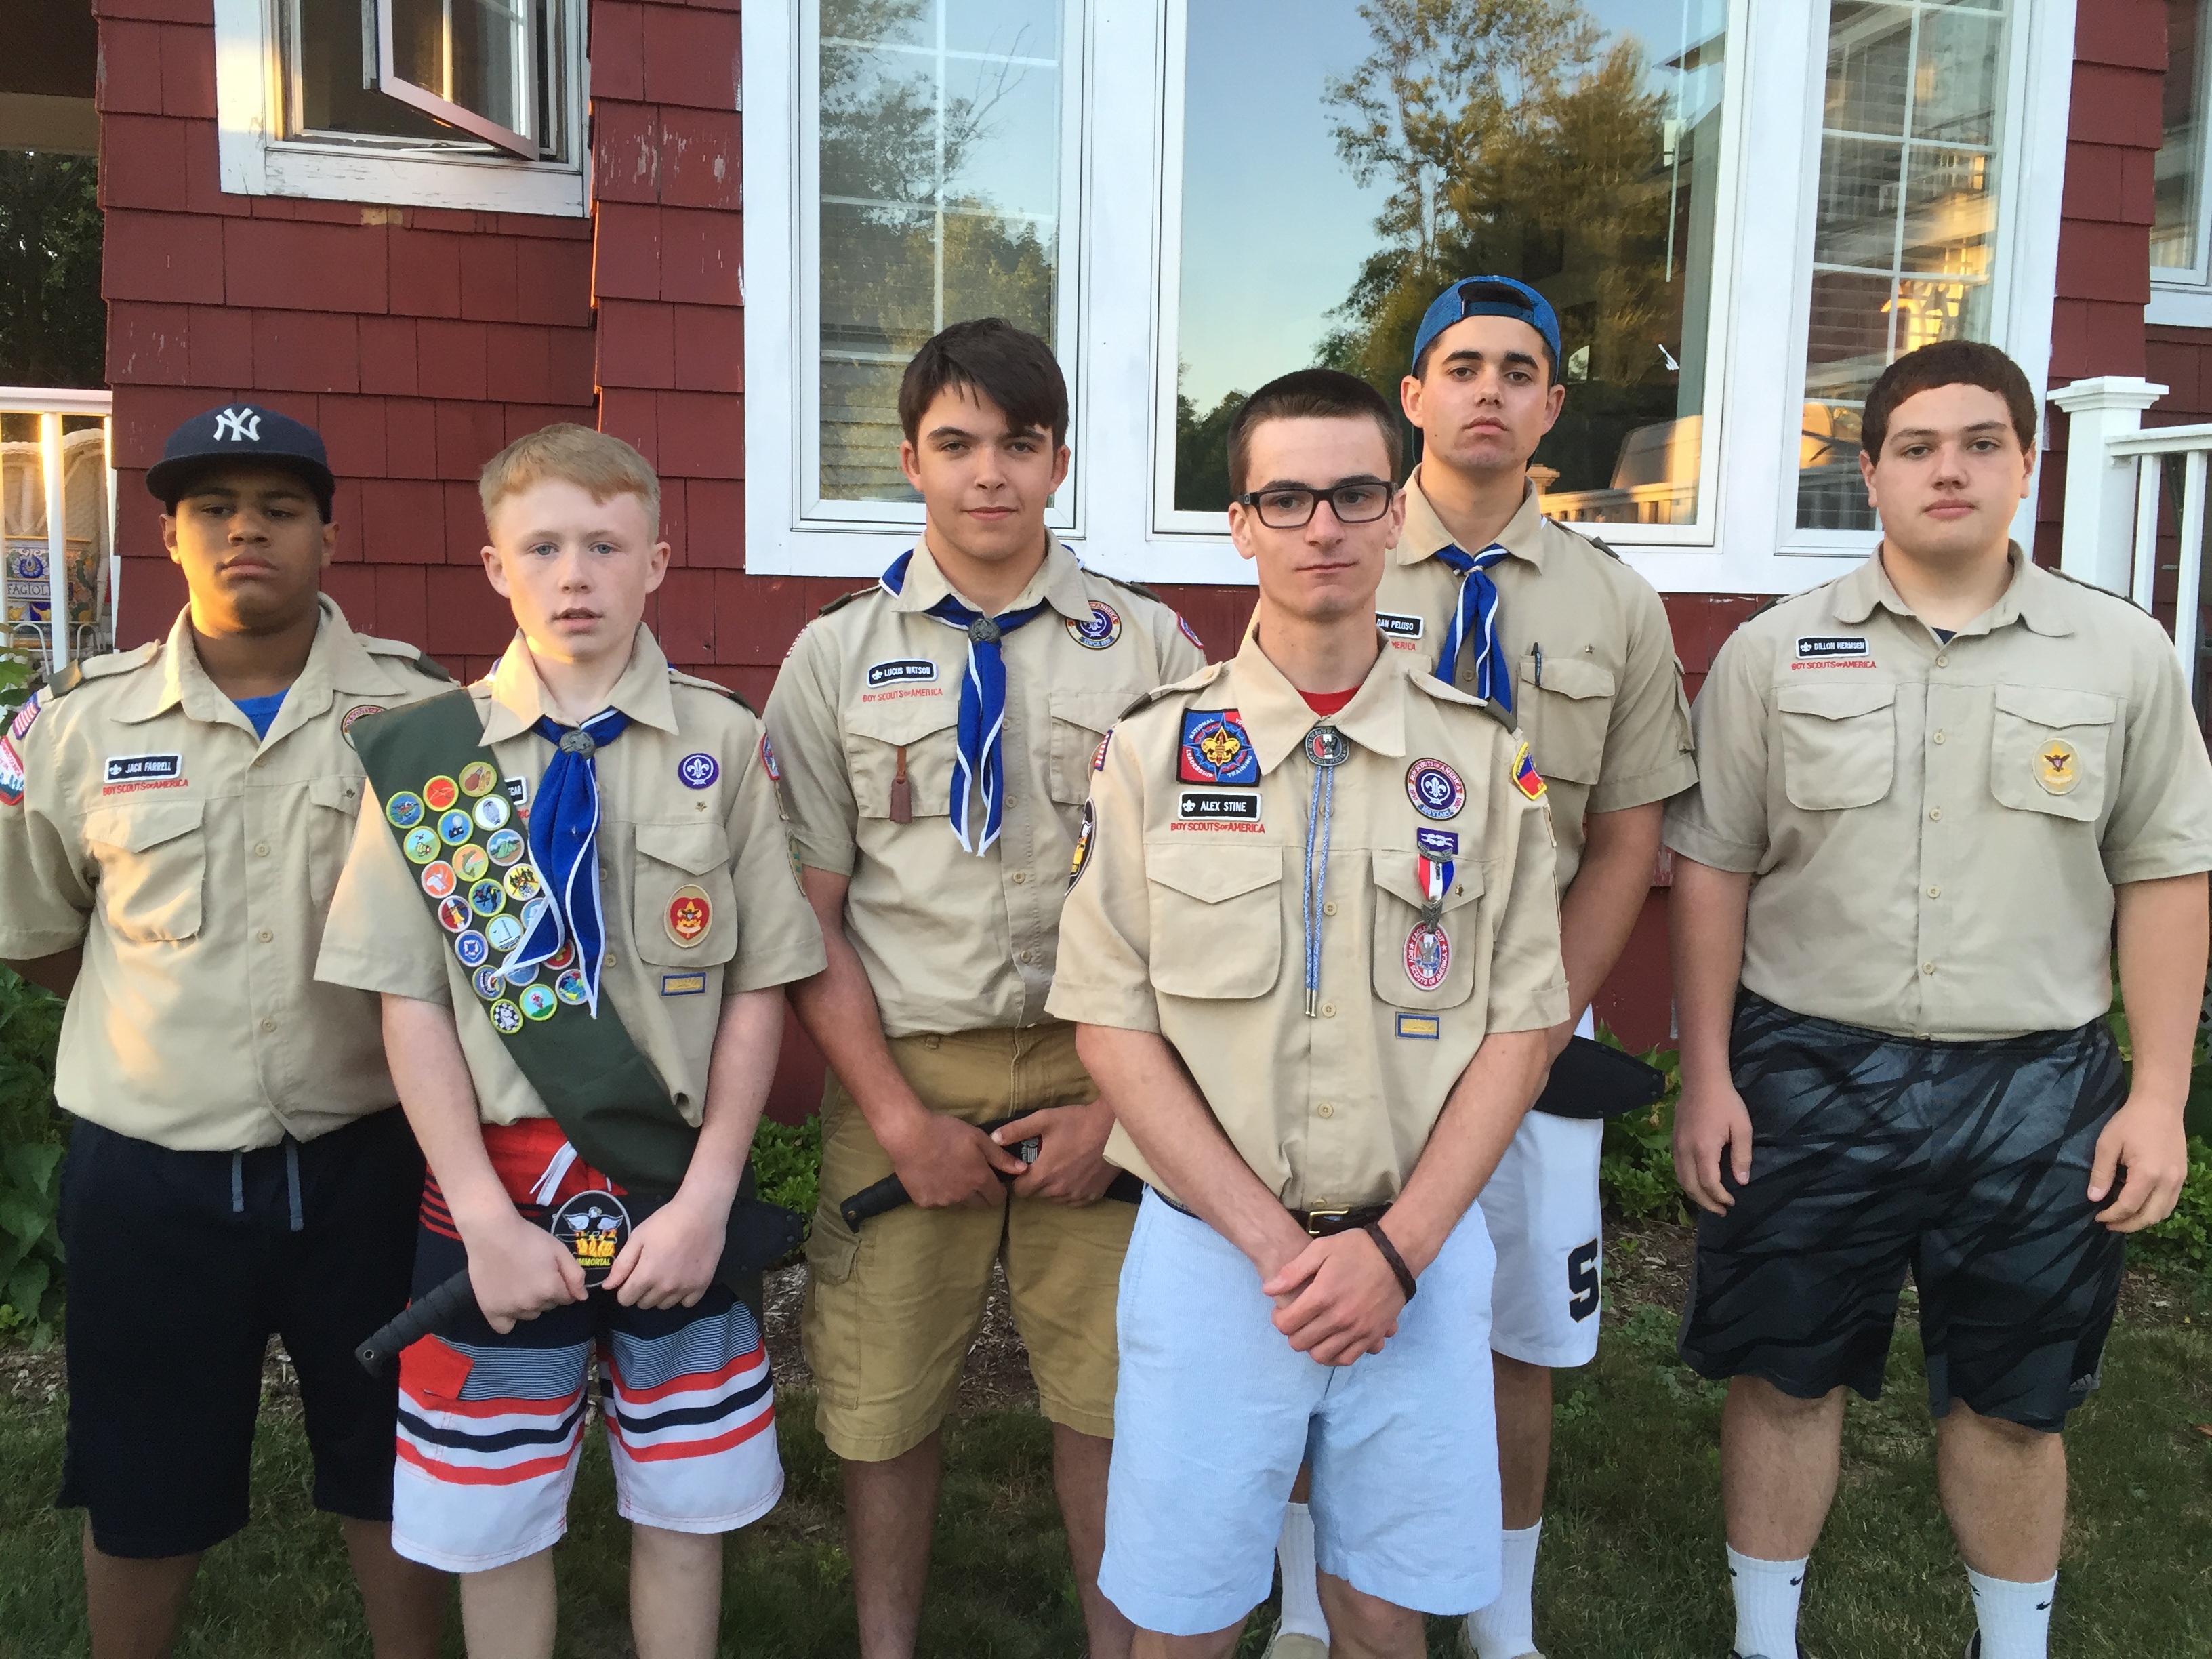 Boy Scout Troop 175, located at St. Mary’s Church in Simsbury, has announce...